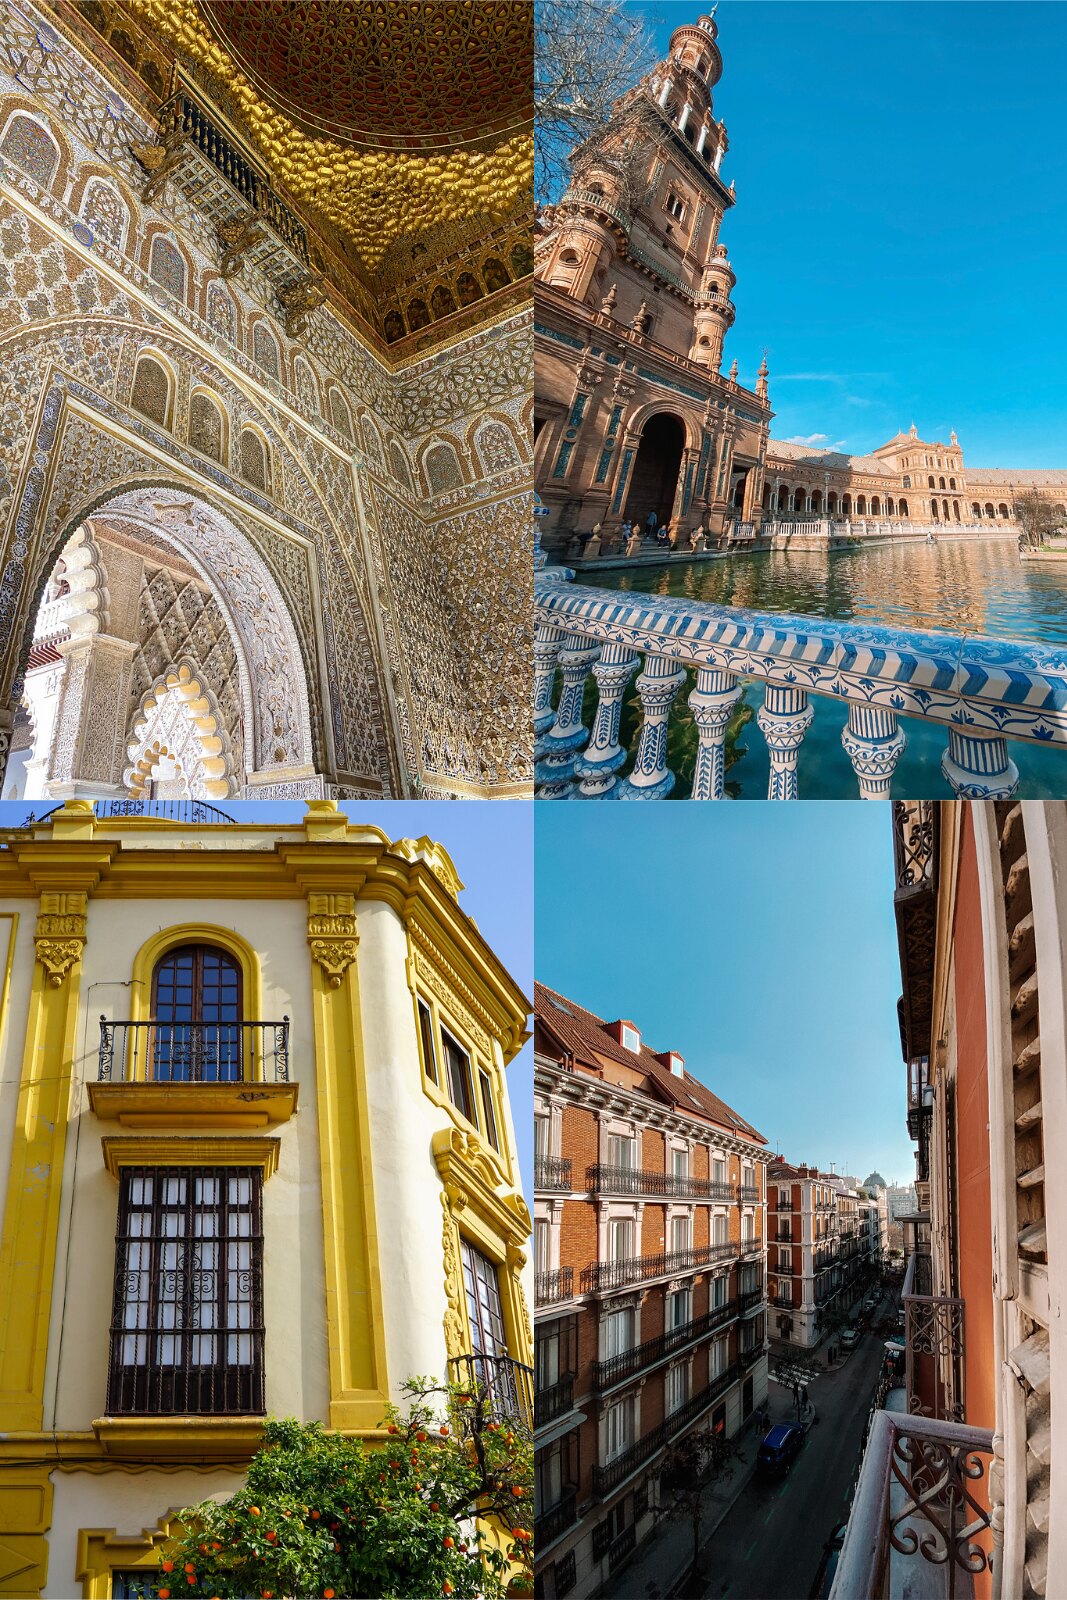 Photos to Inspire You to Visit Spain | European Vacation Inspiration | Spain Travel | Spain Aesthetics | Spain Aesthetic | Most Beautiful Places in Spain | Best Places to Visit in Spain